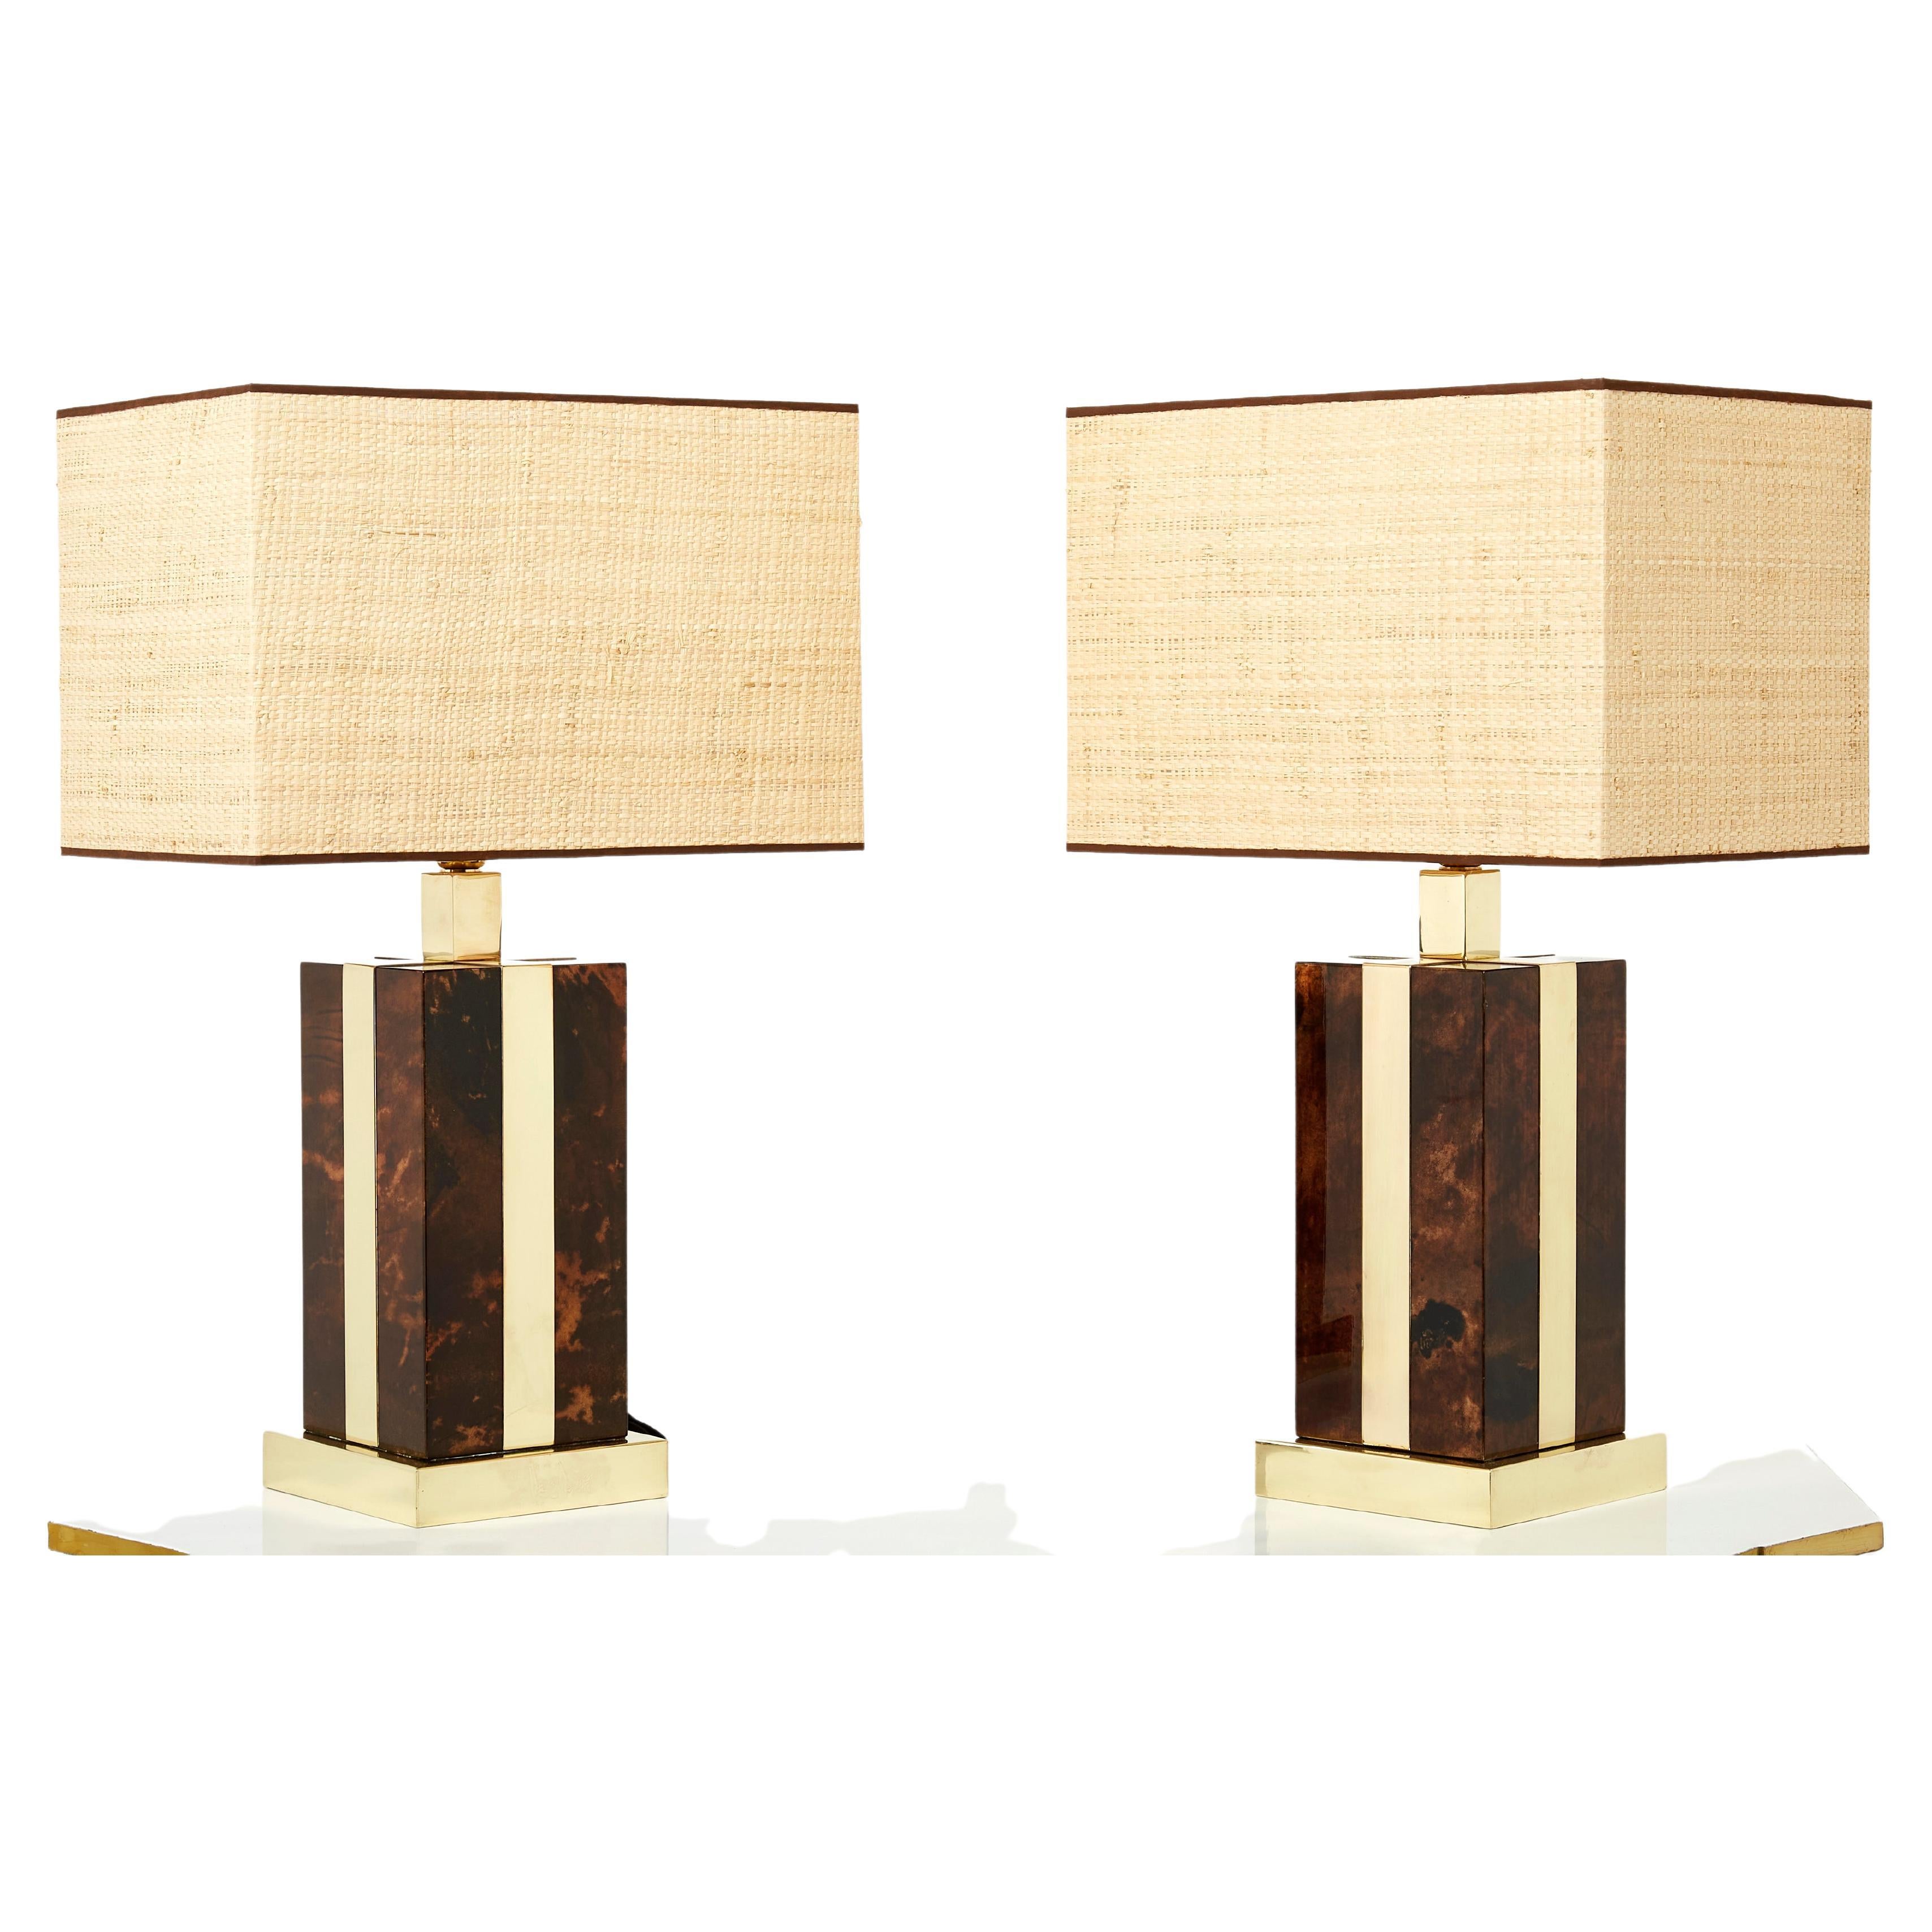 This pair of Aldo Tura Italian goatskin and brass table lamps were made in the early 1970s. They feature a varnished goatskin parchment, in rich shades of light to dark brown, typical of Aldo Tura’s work, with brass inlays on each side, topped with